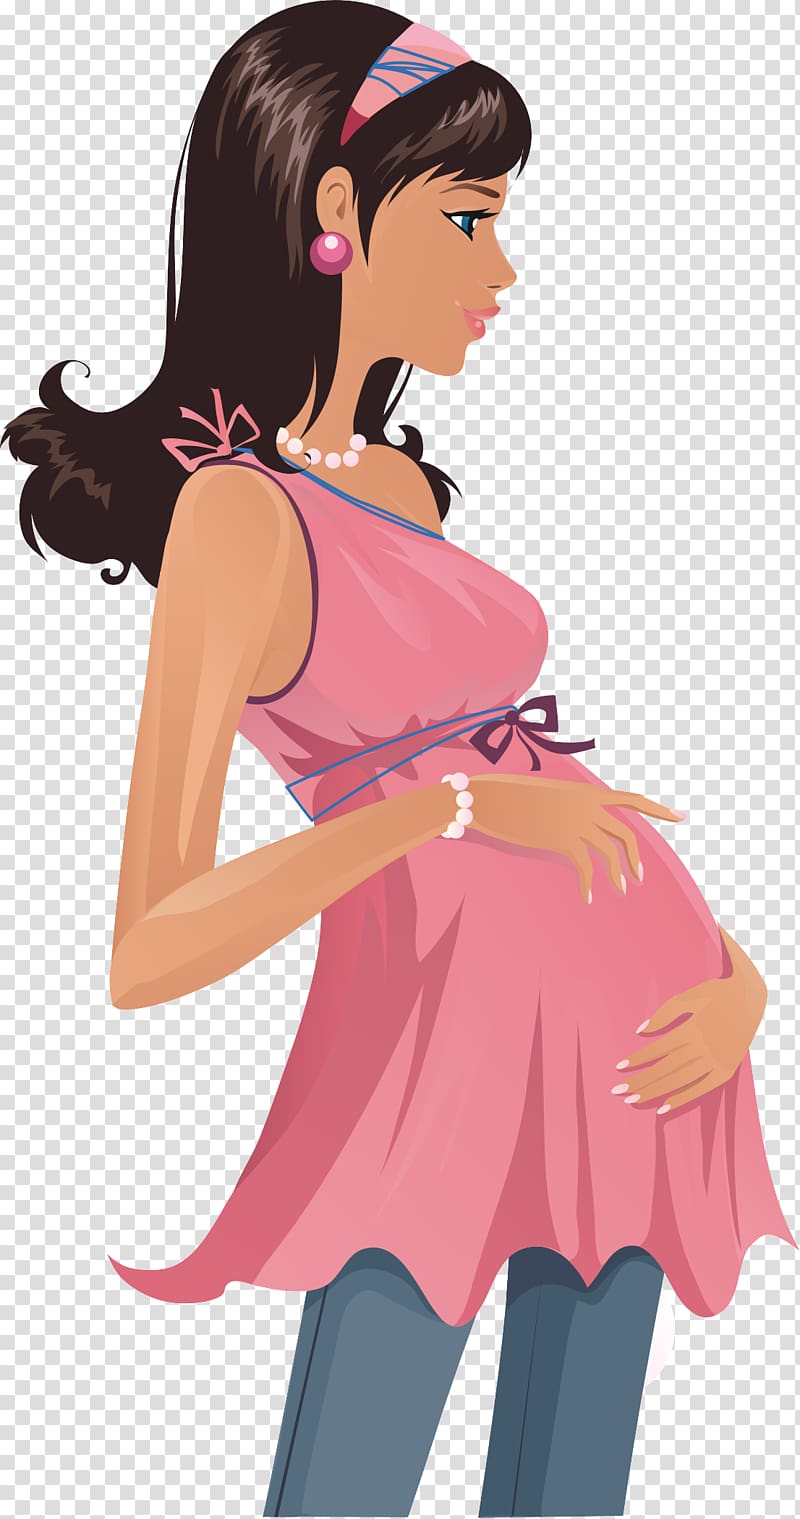 women's pink and gray dressed illustration, Teenage pregnancy Woman Pregnancy test, Pregnant woman transparent background PNG clipart